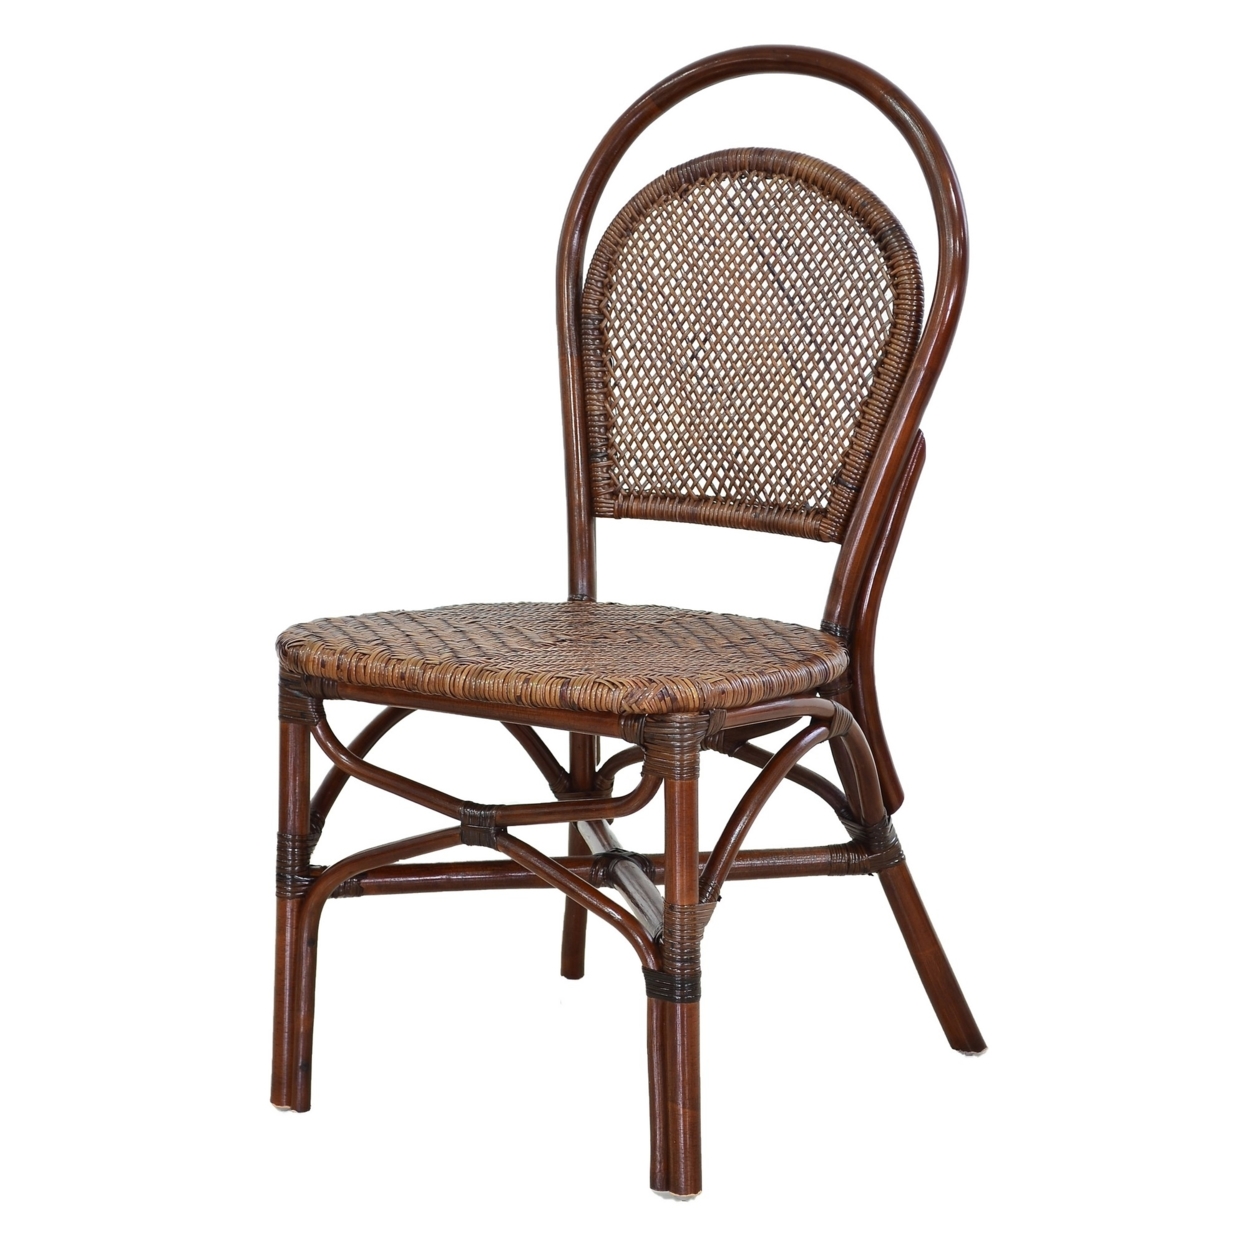 19 Inch Classic Wood Armless Chair, Rattan, Curved Back, Dual Toned, Brown- Saltoro Sherpi